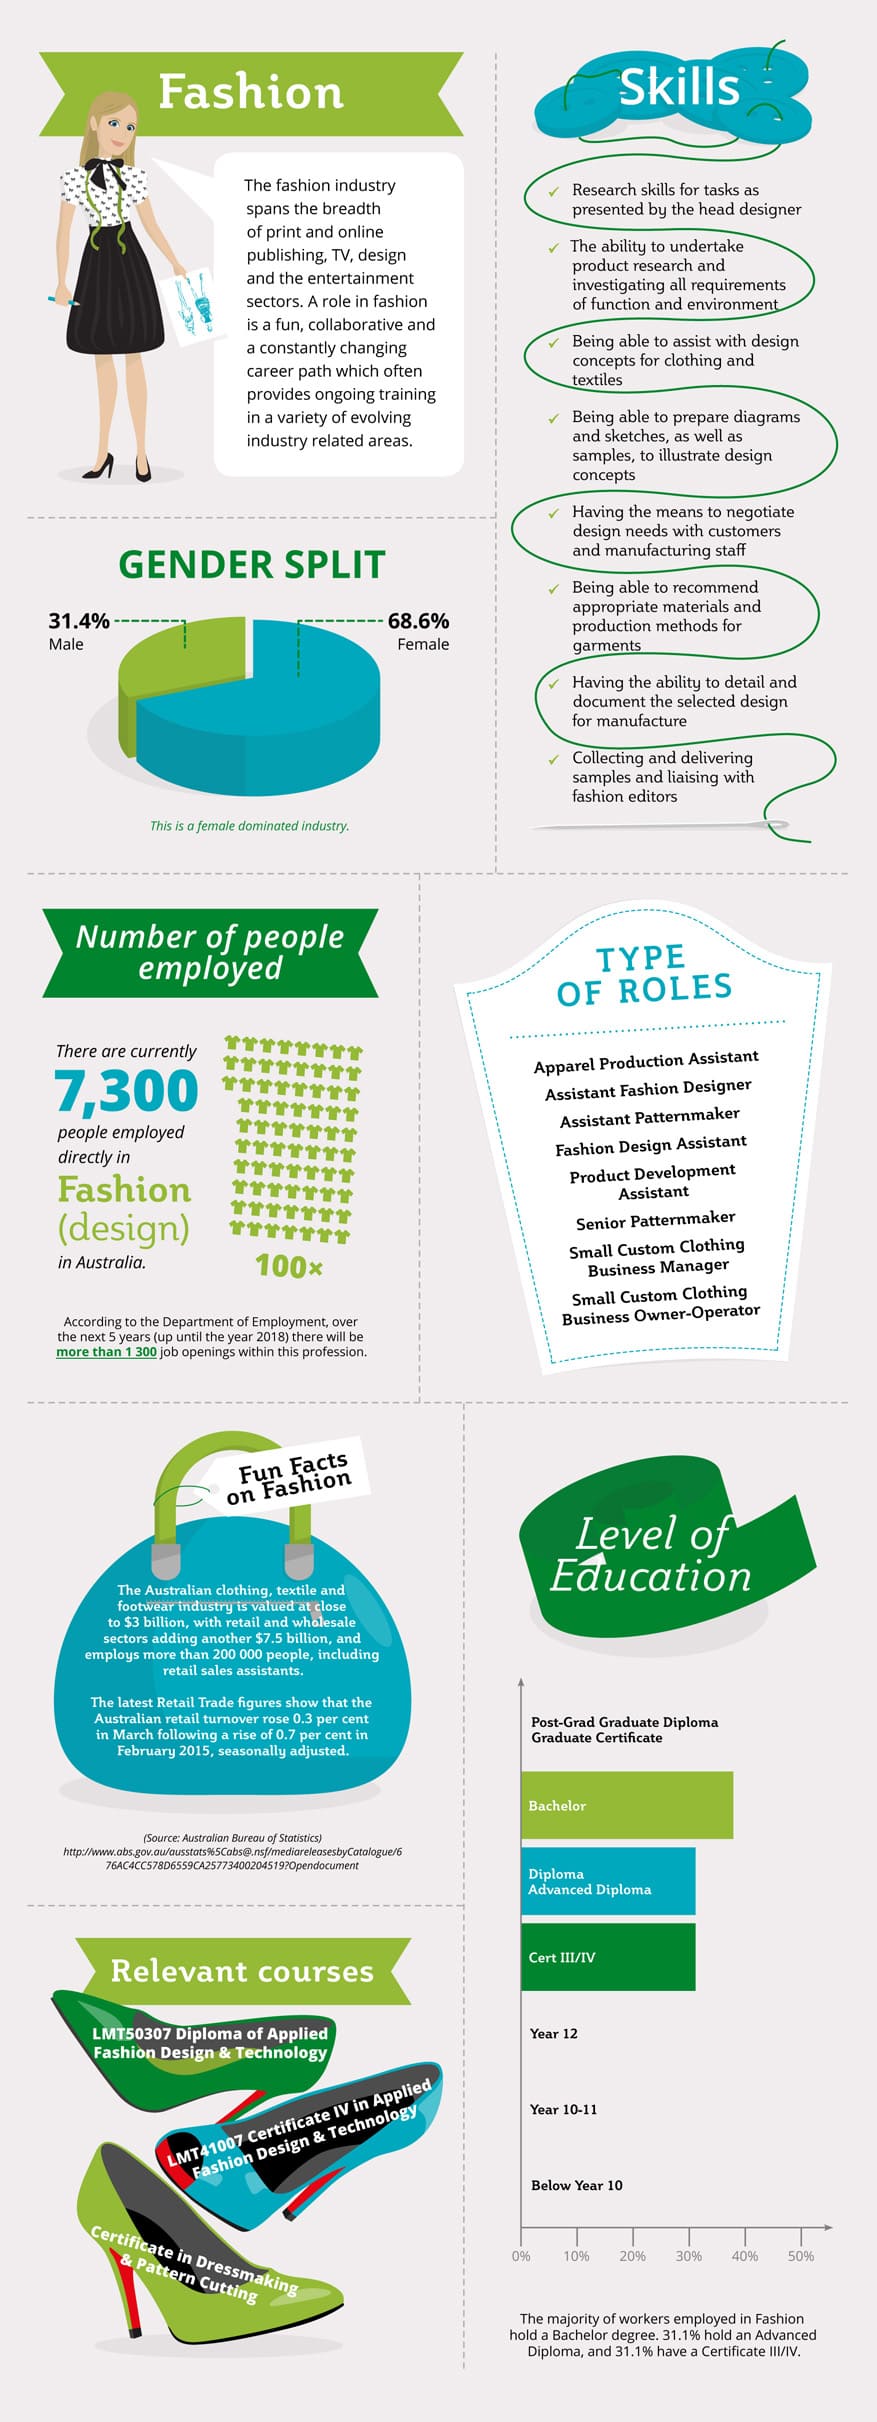 Careers in Fashion infographic